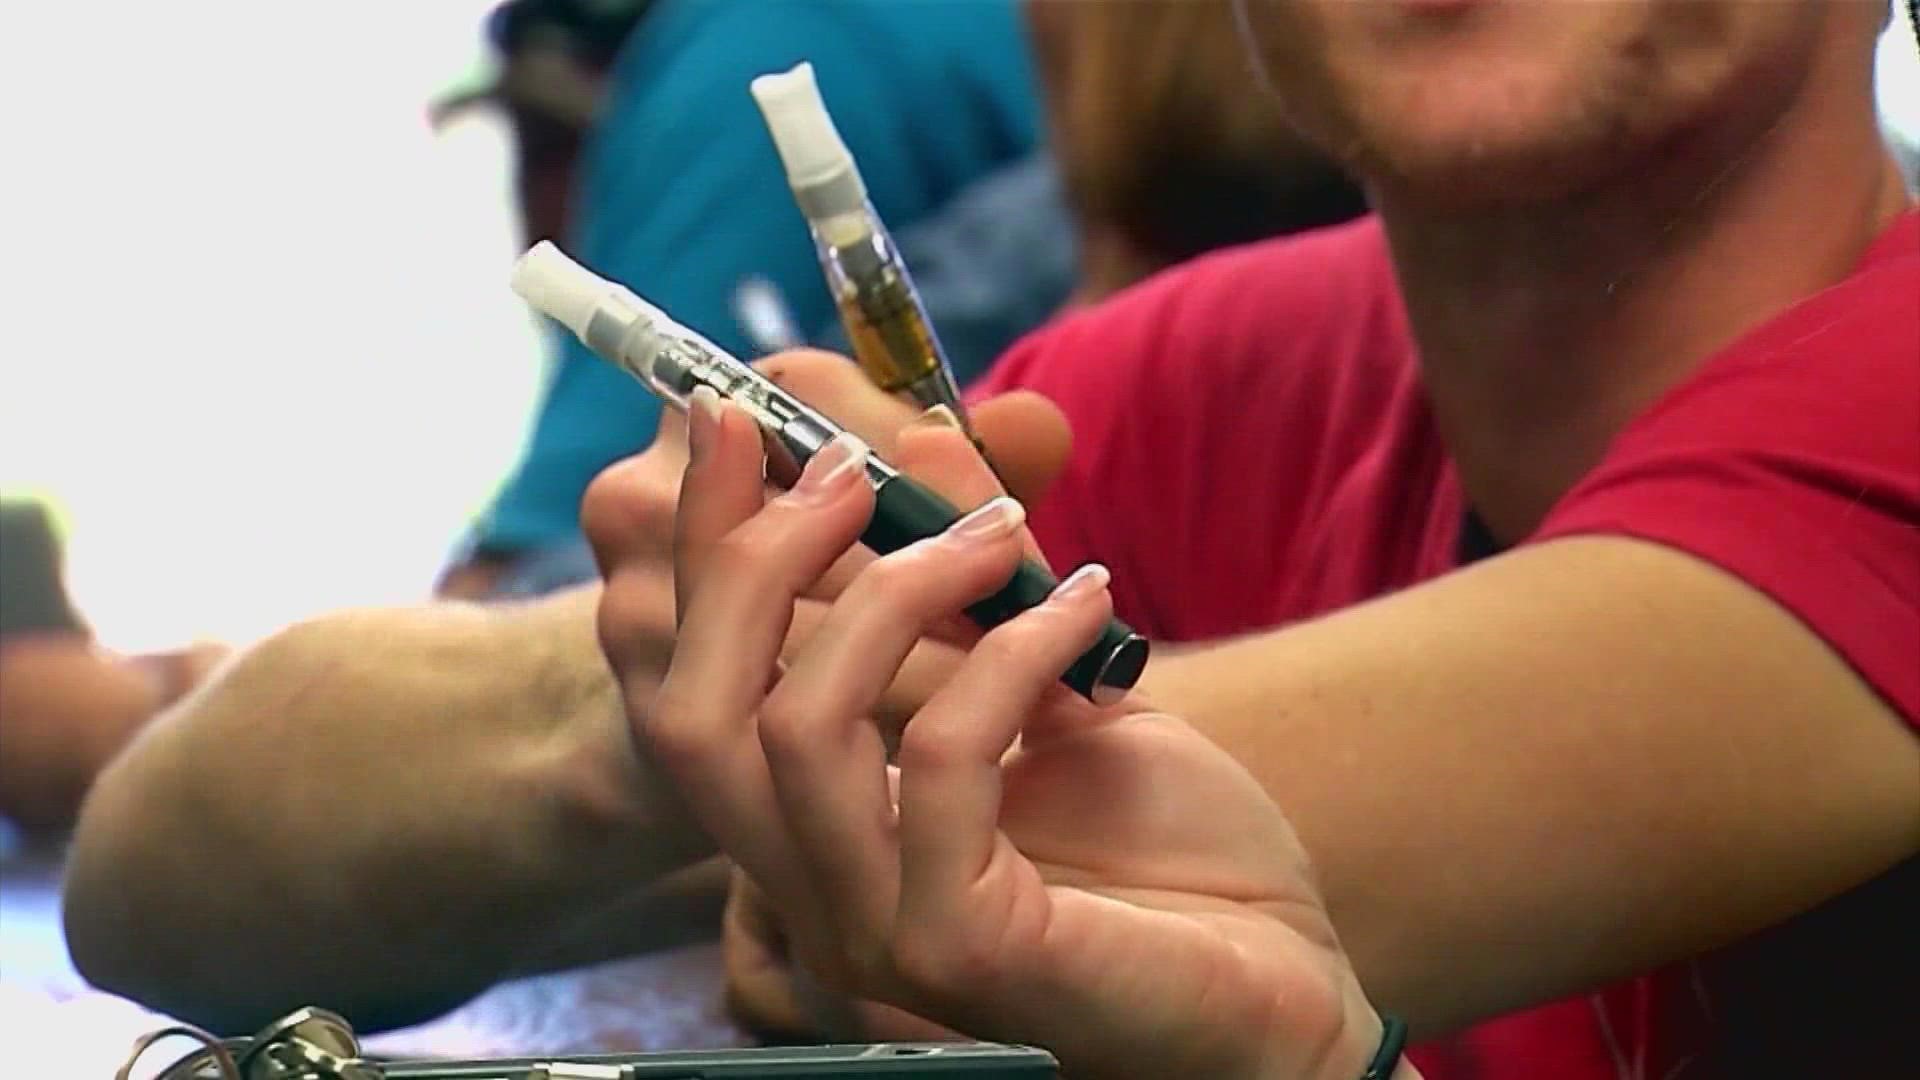 Health experts are warning parents about the resurgence in vaping and e-cigarette use in kids this upcoming school year.